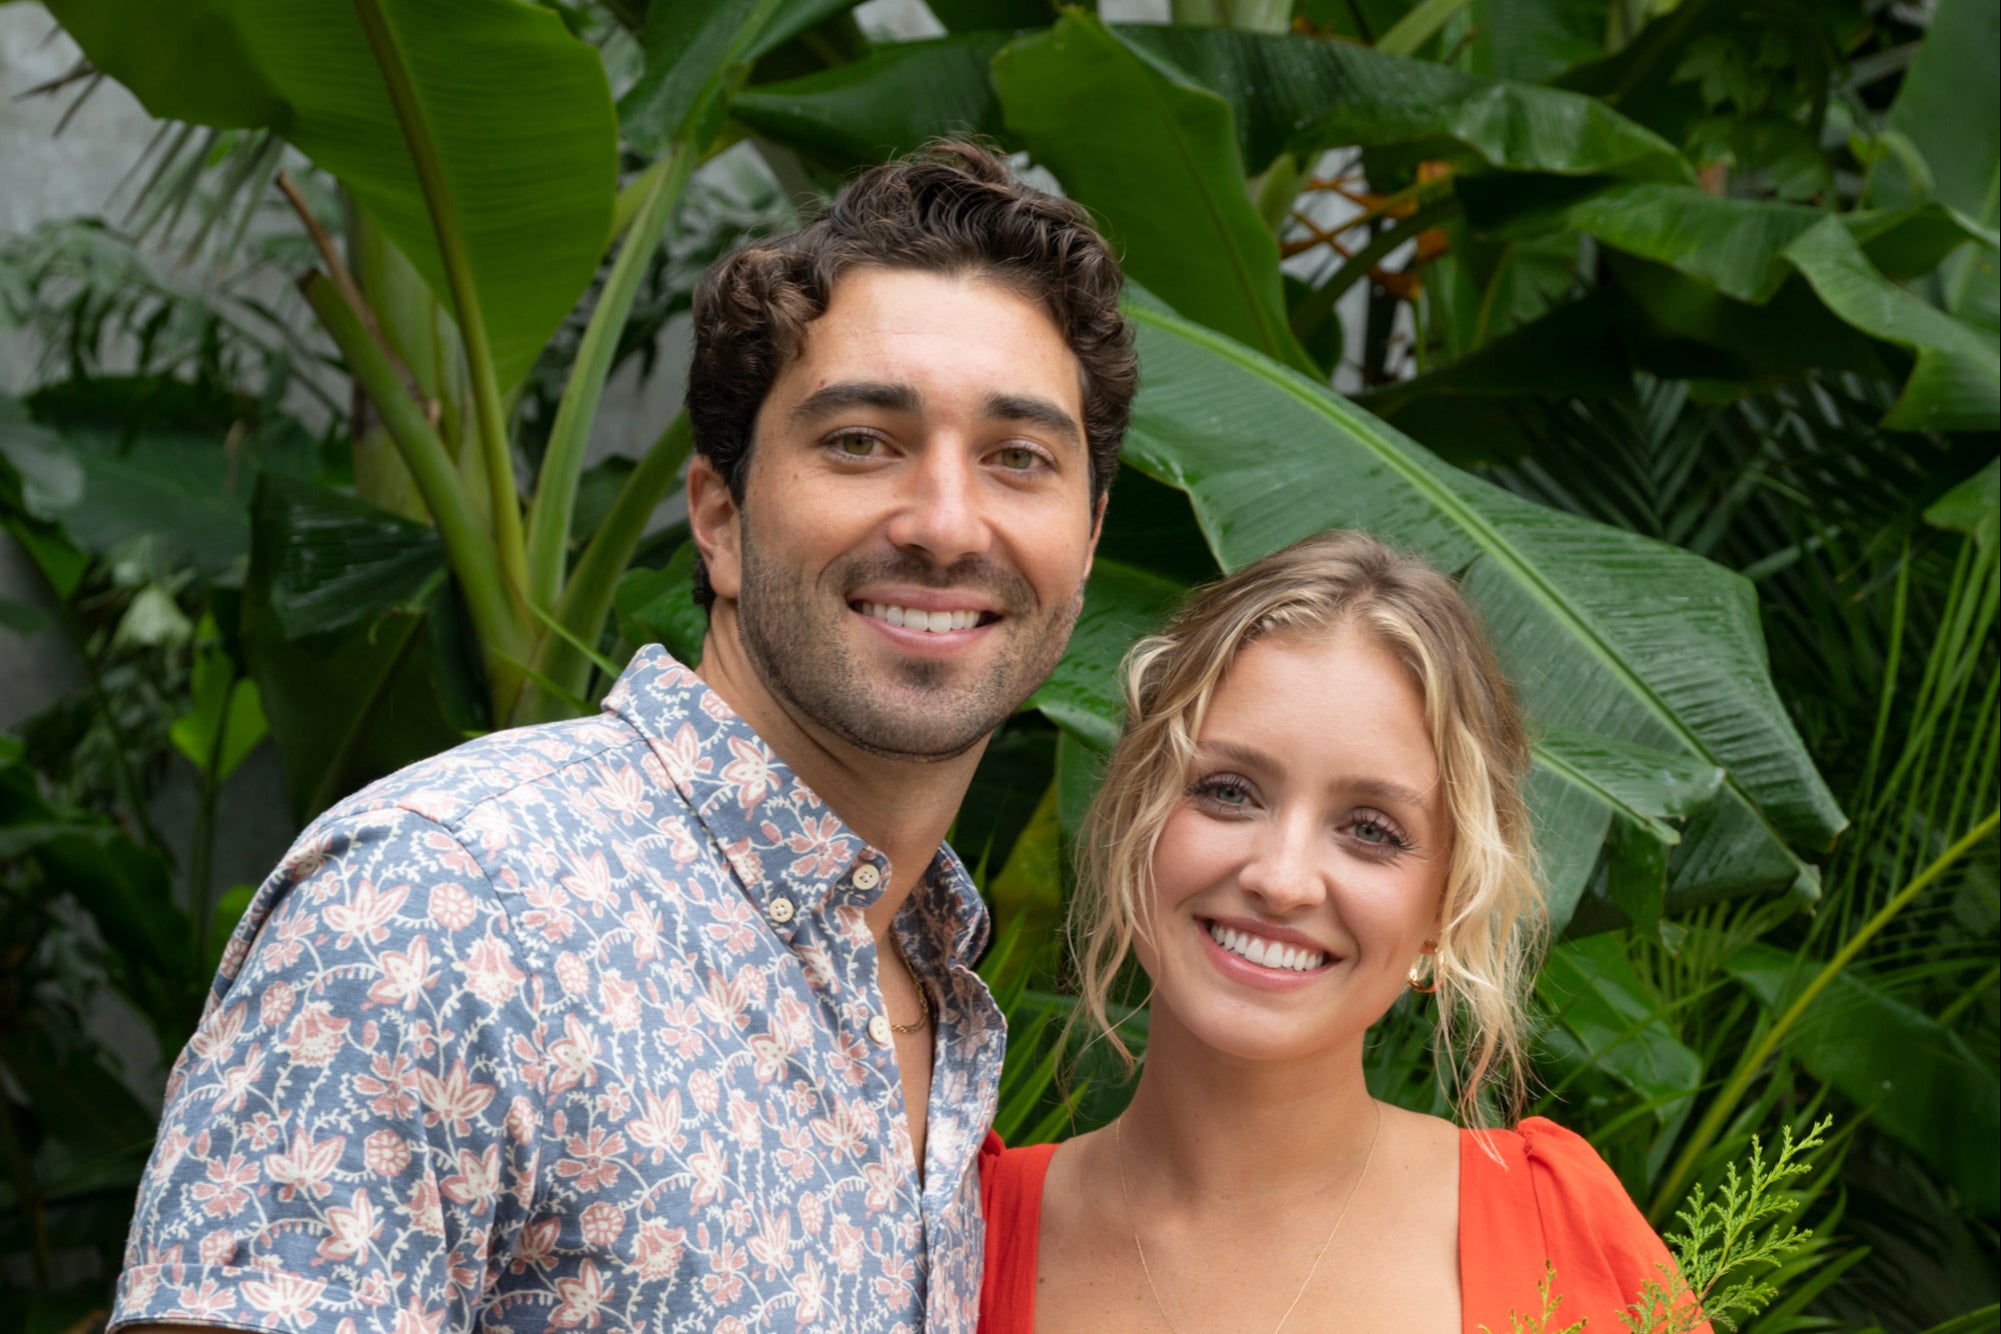 Joey and Daisy on ‘The Bachelor’